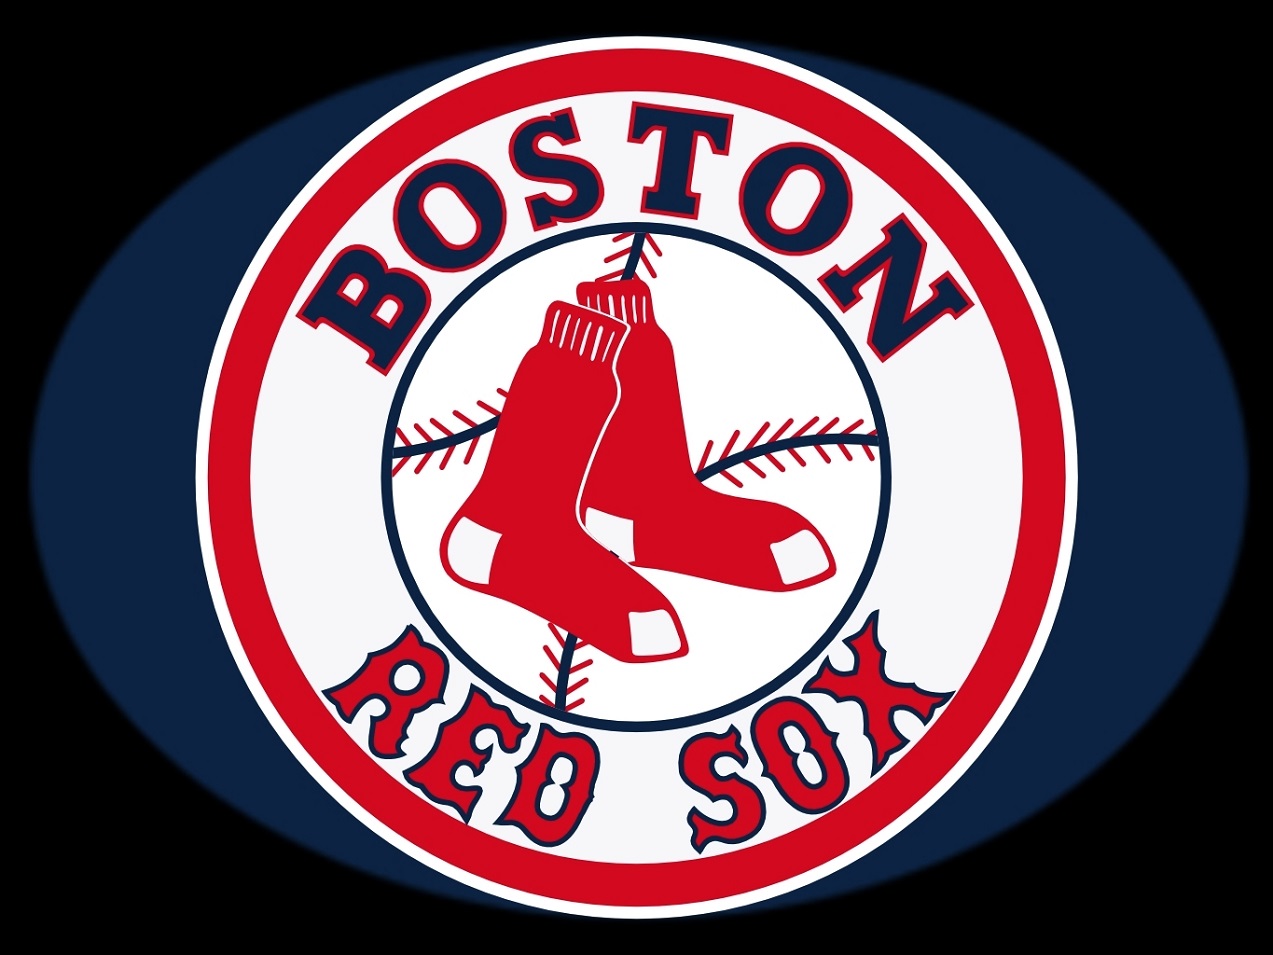 BOSTON RED SOX SCHEDULE